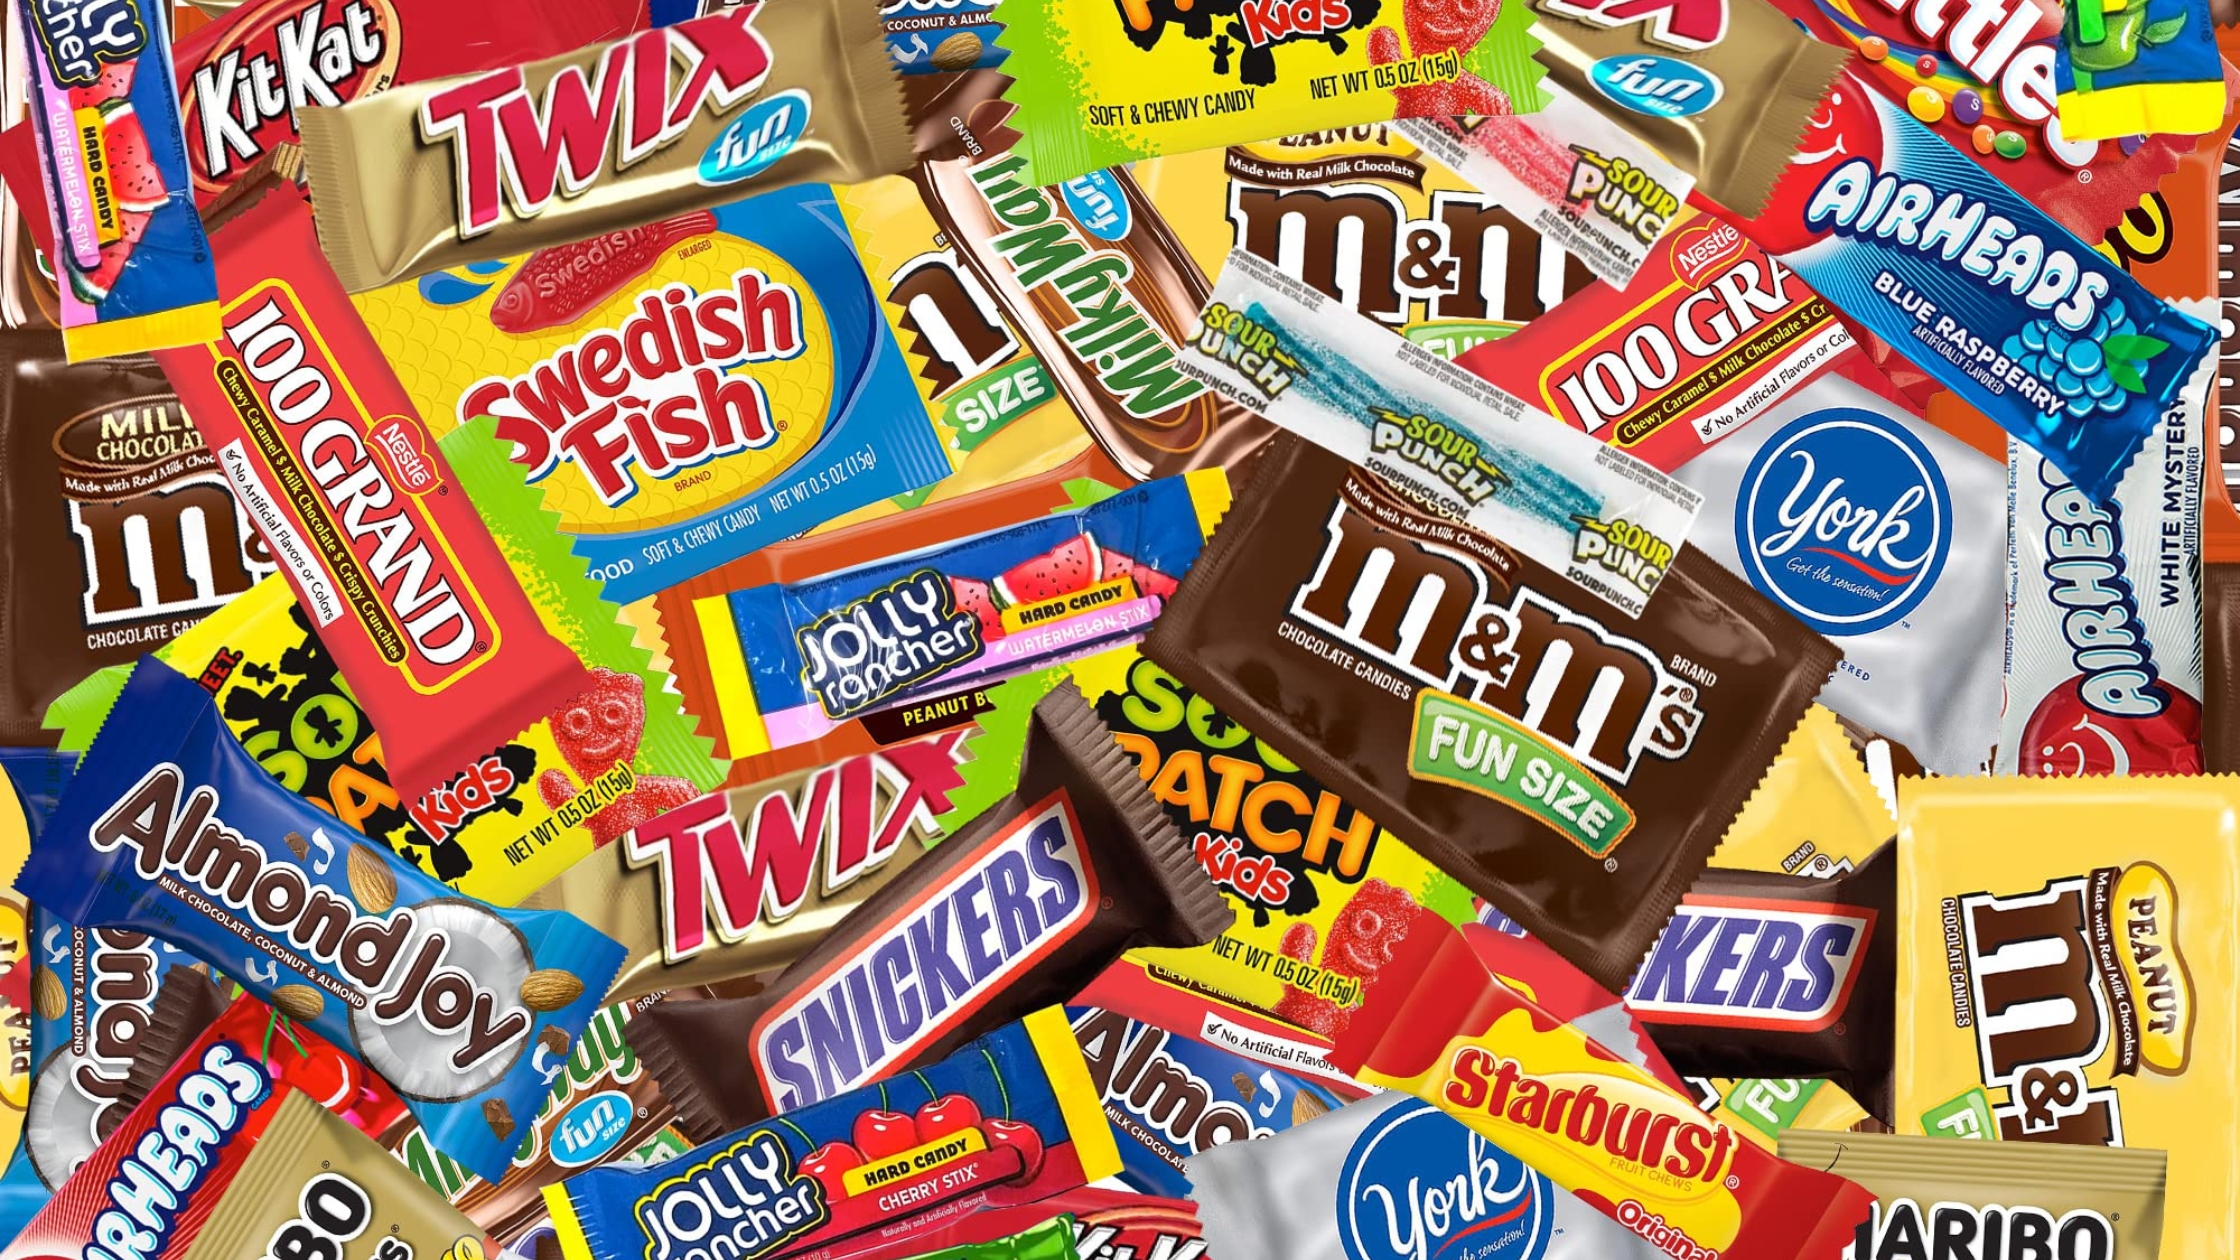 SPOTTED ON SHELVES: M&M's Milk Chocolate Bars (2018) - The